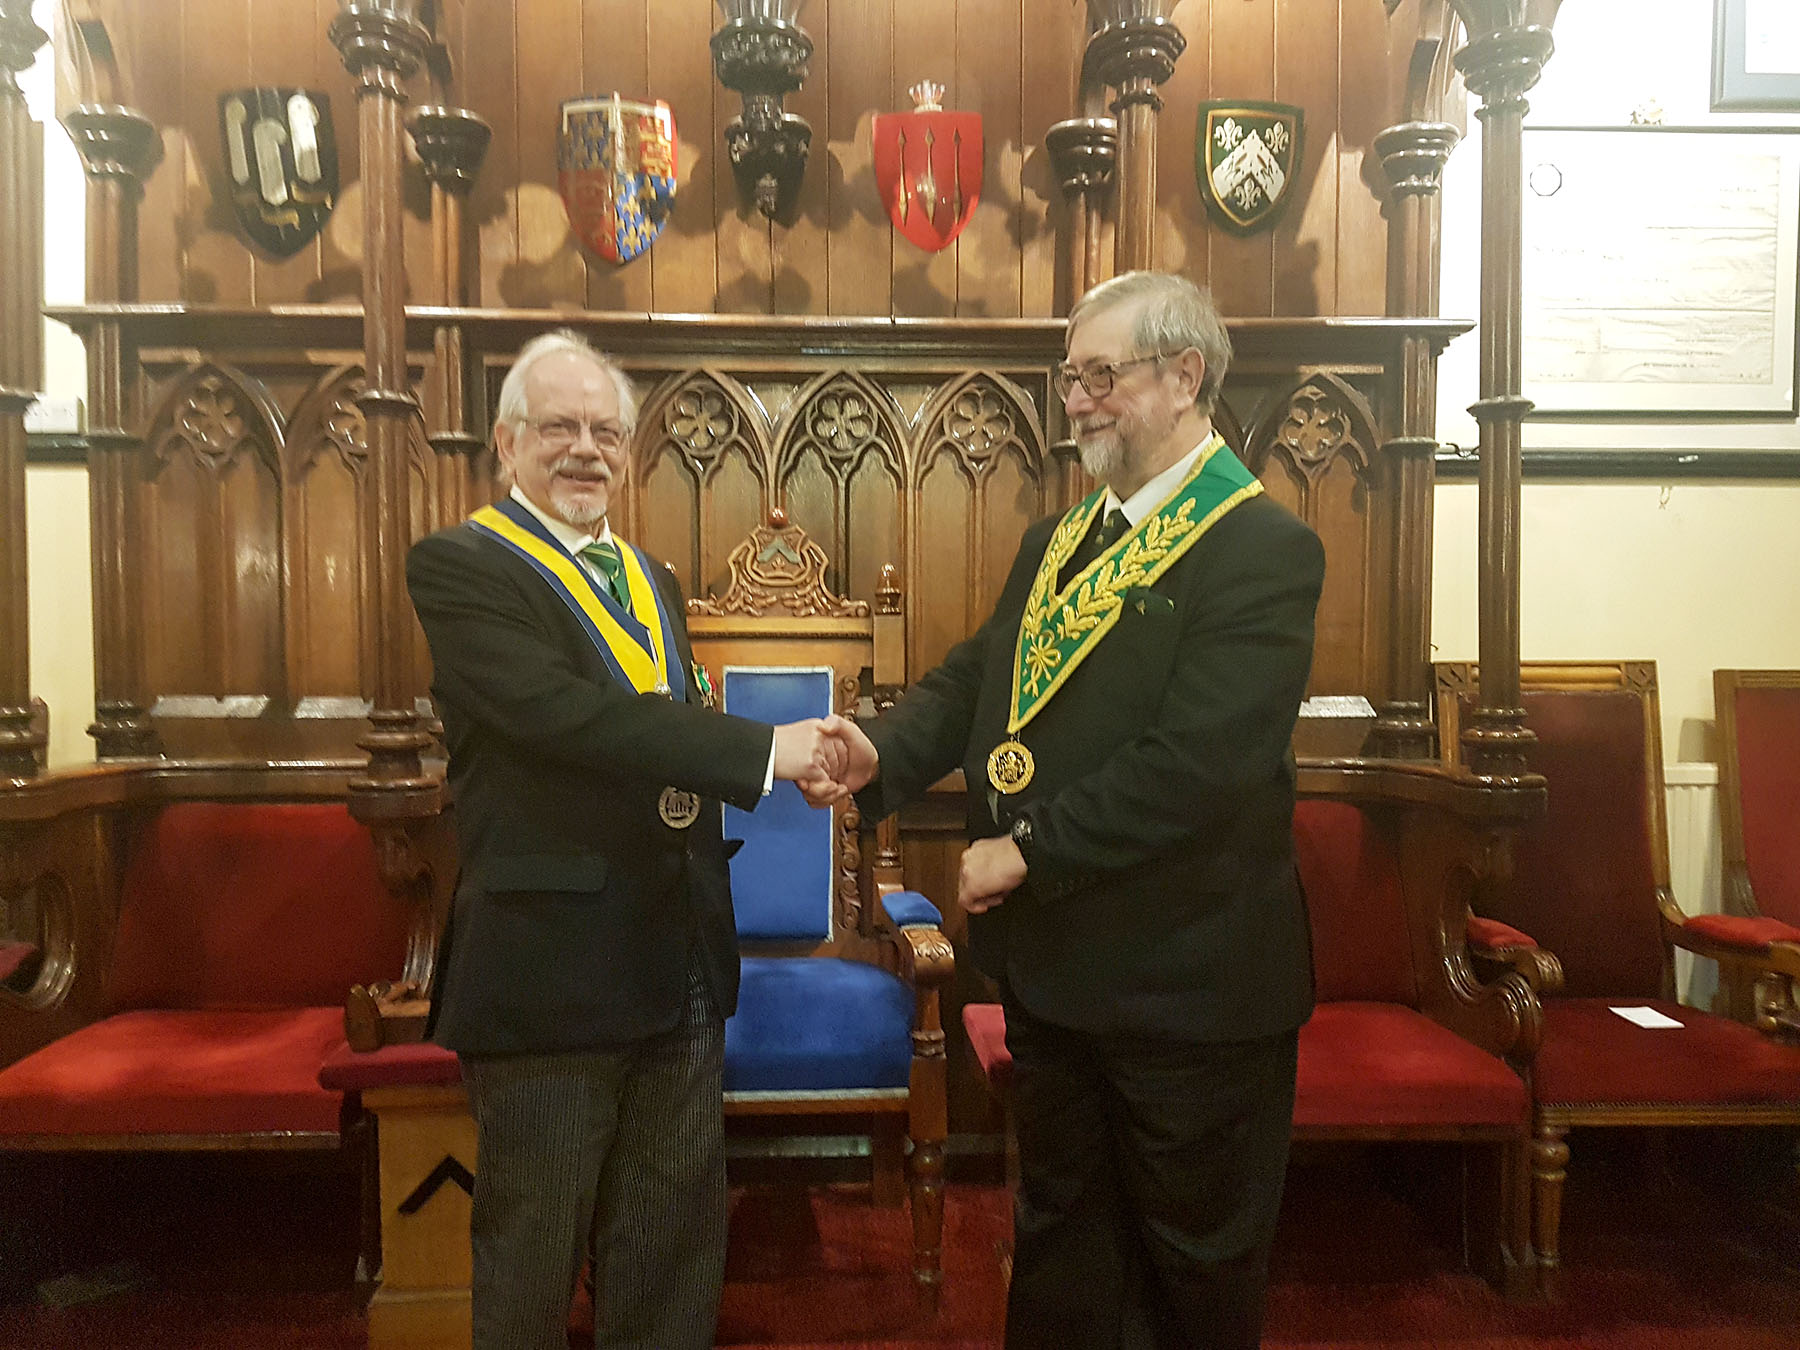 The District Grand Prefect visits the Canterbury Council 65